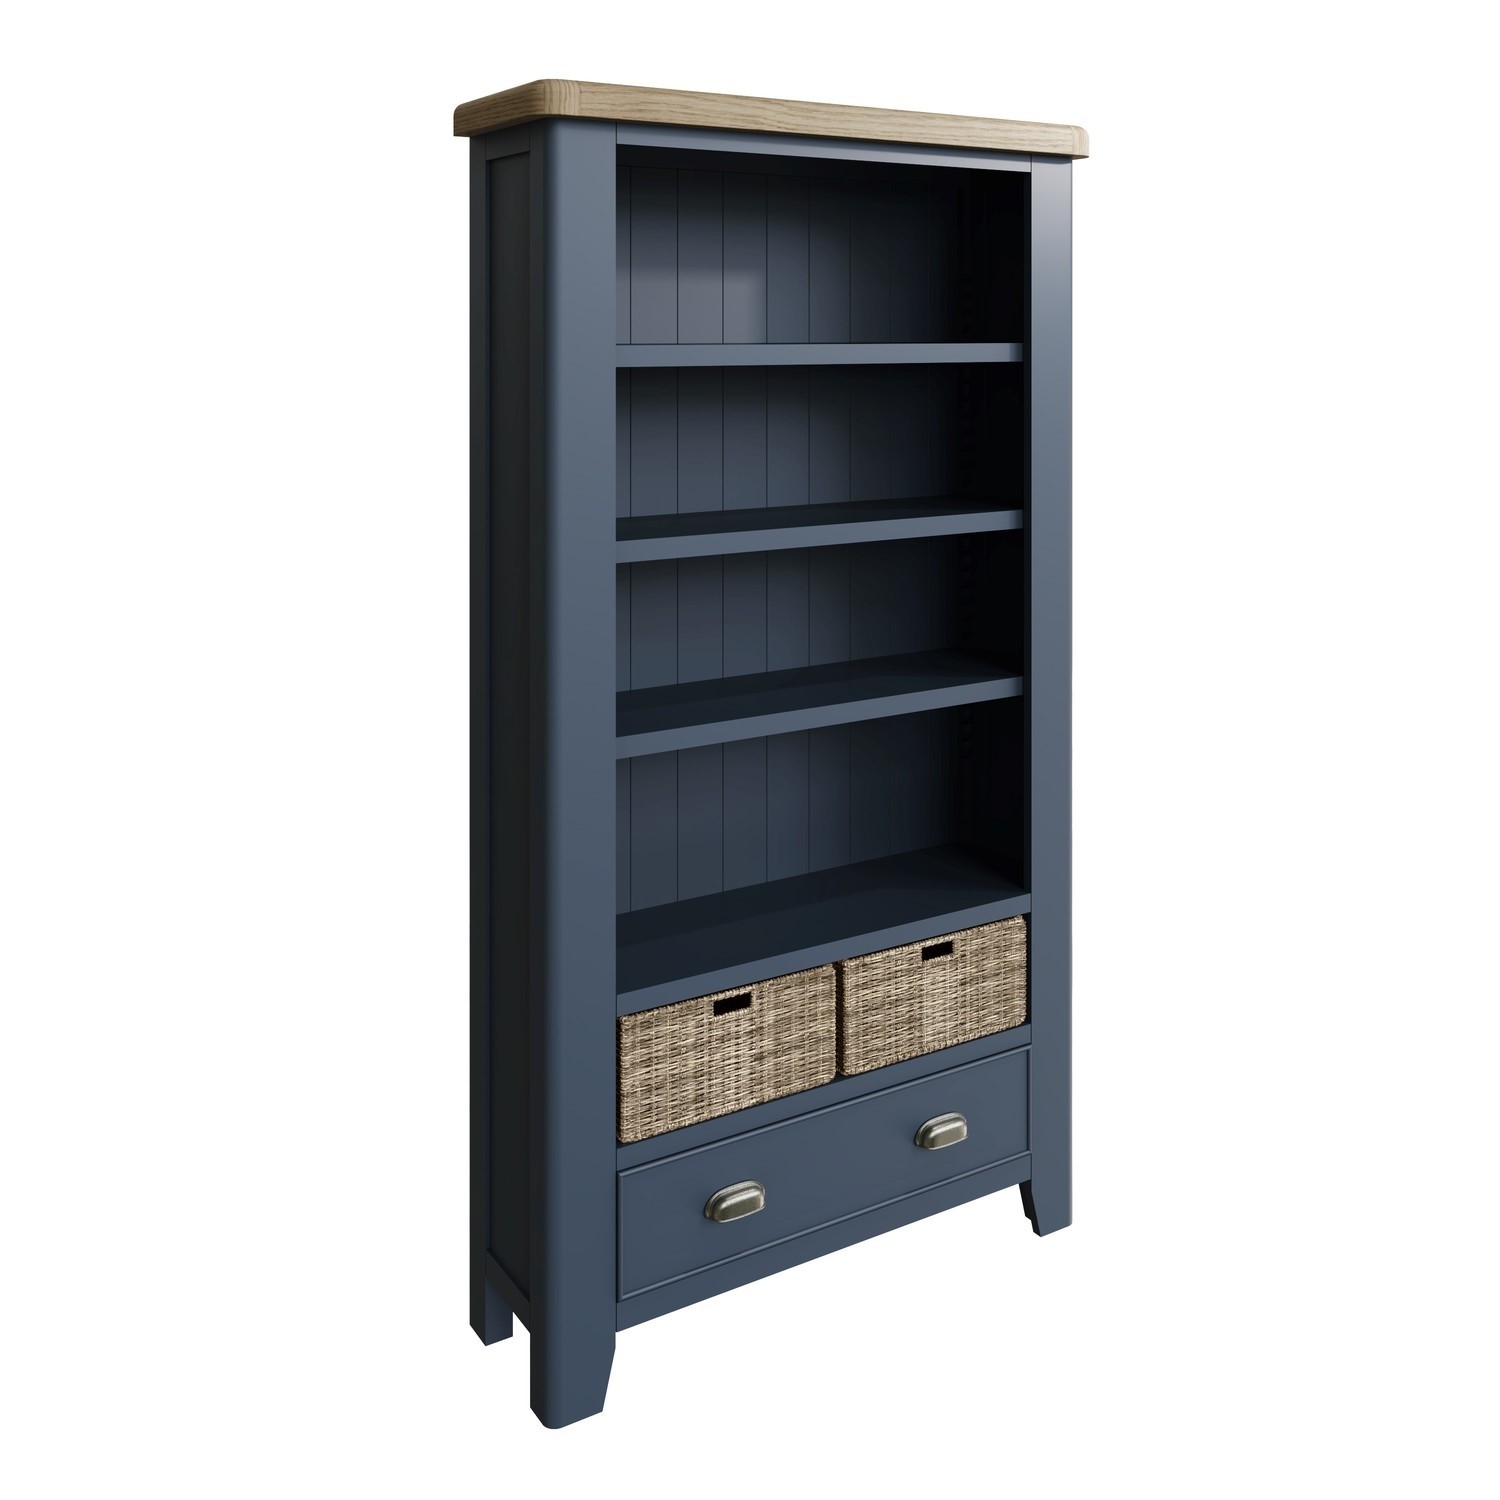 Read more about Oak & blue large bookcase with wicker baskets